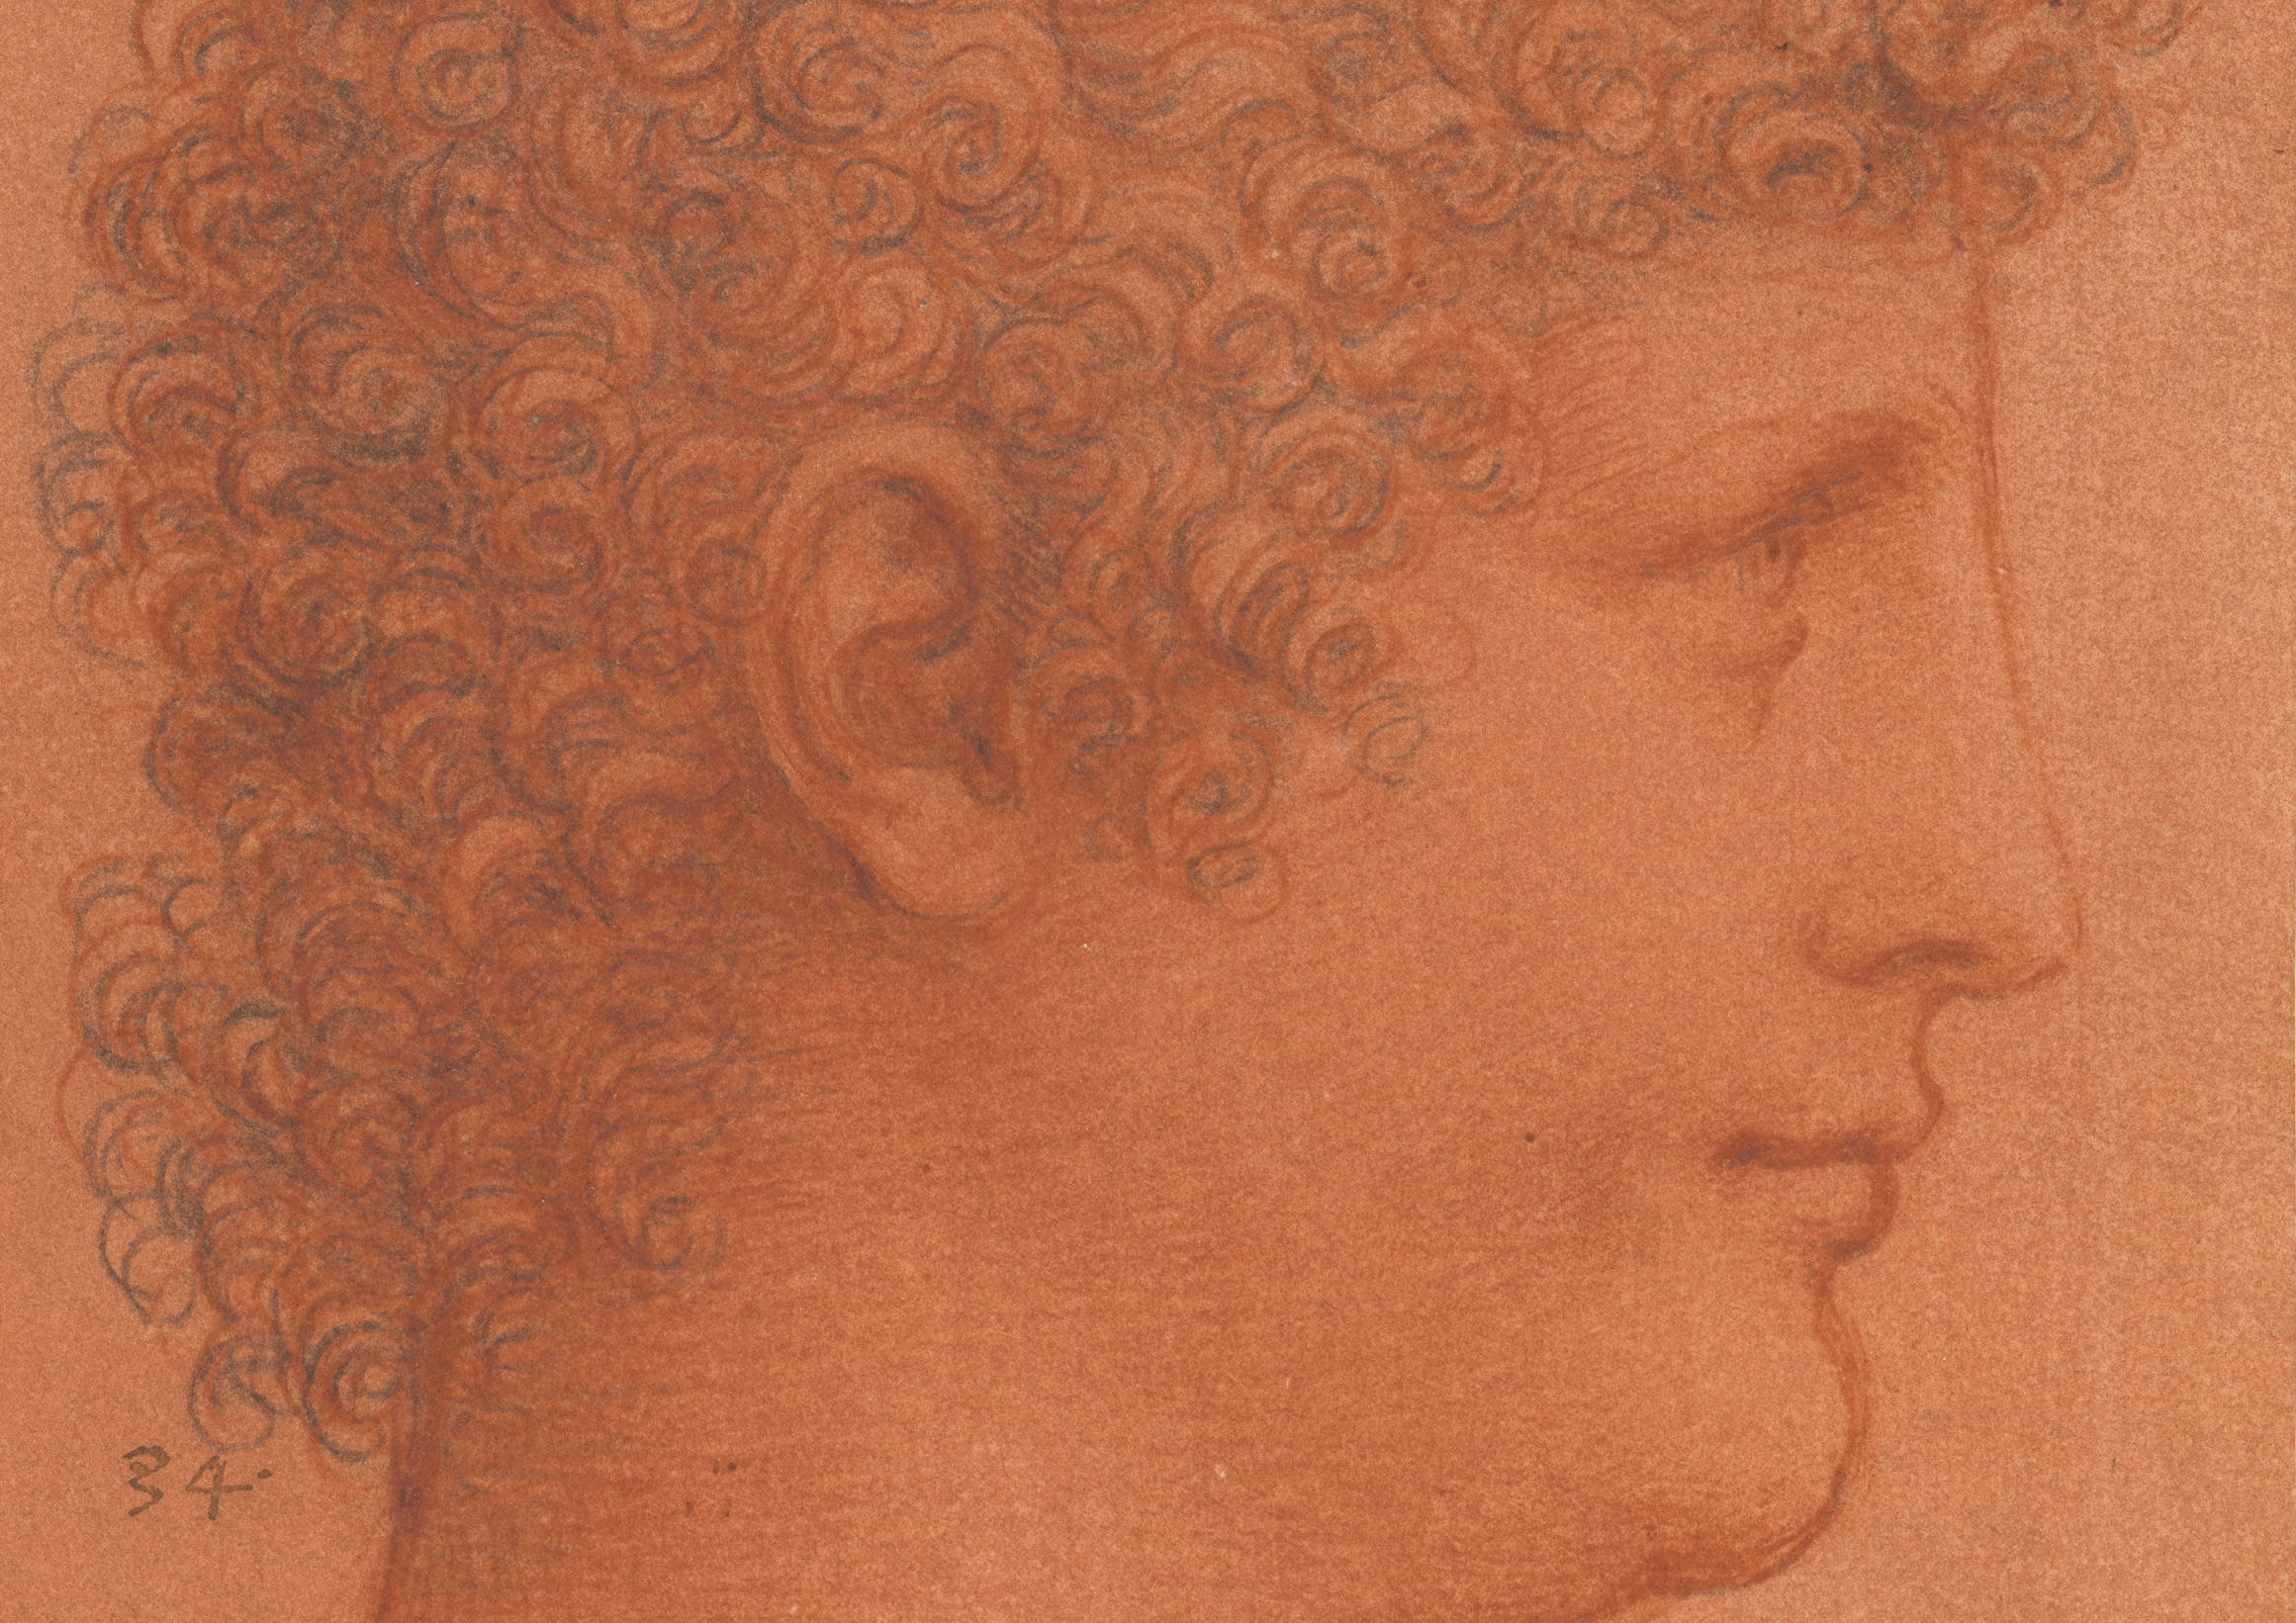 The head of a youth, c.1510, one of almost 150 drawings by Leonardo da Vinci will go on display (Royal Collection Trust/PA Wire)